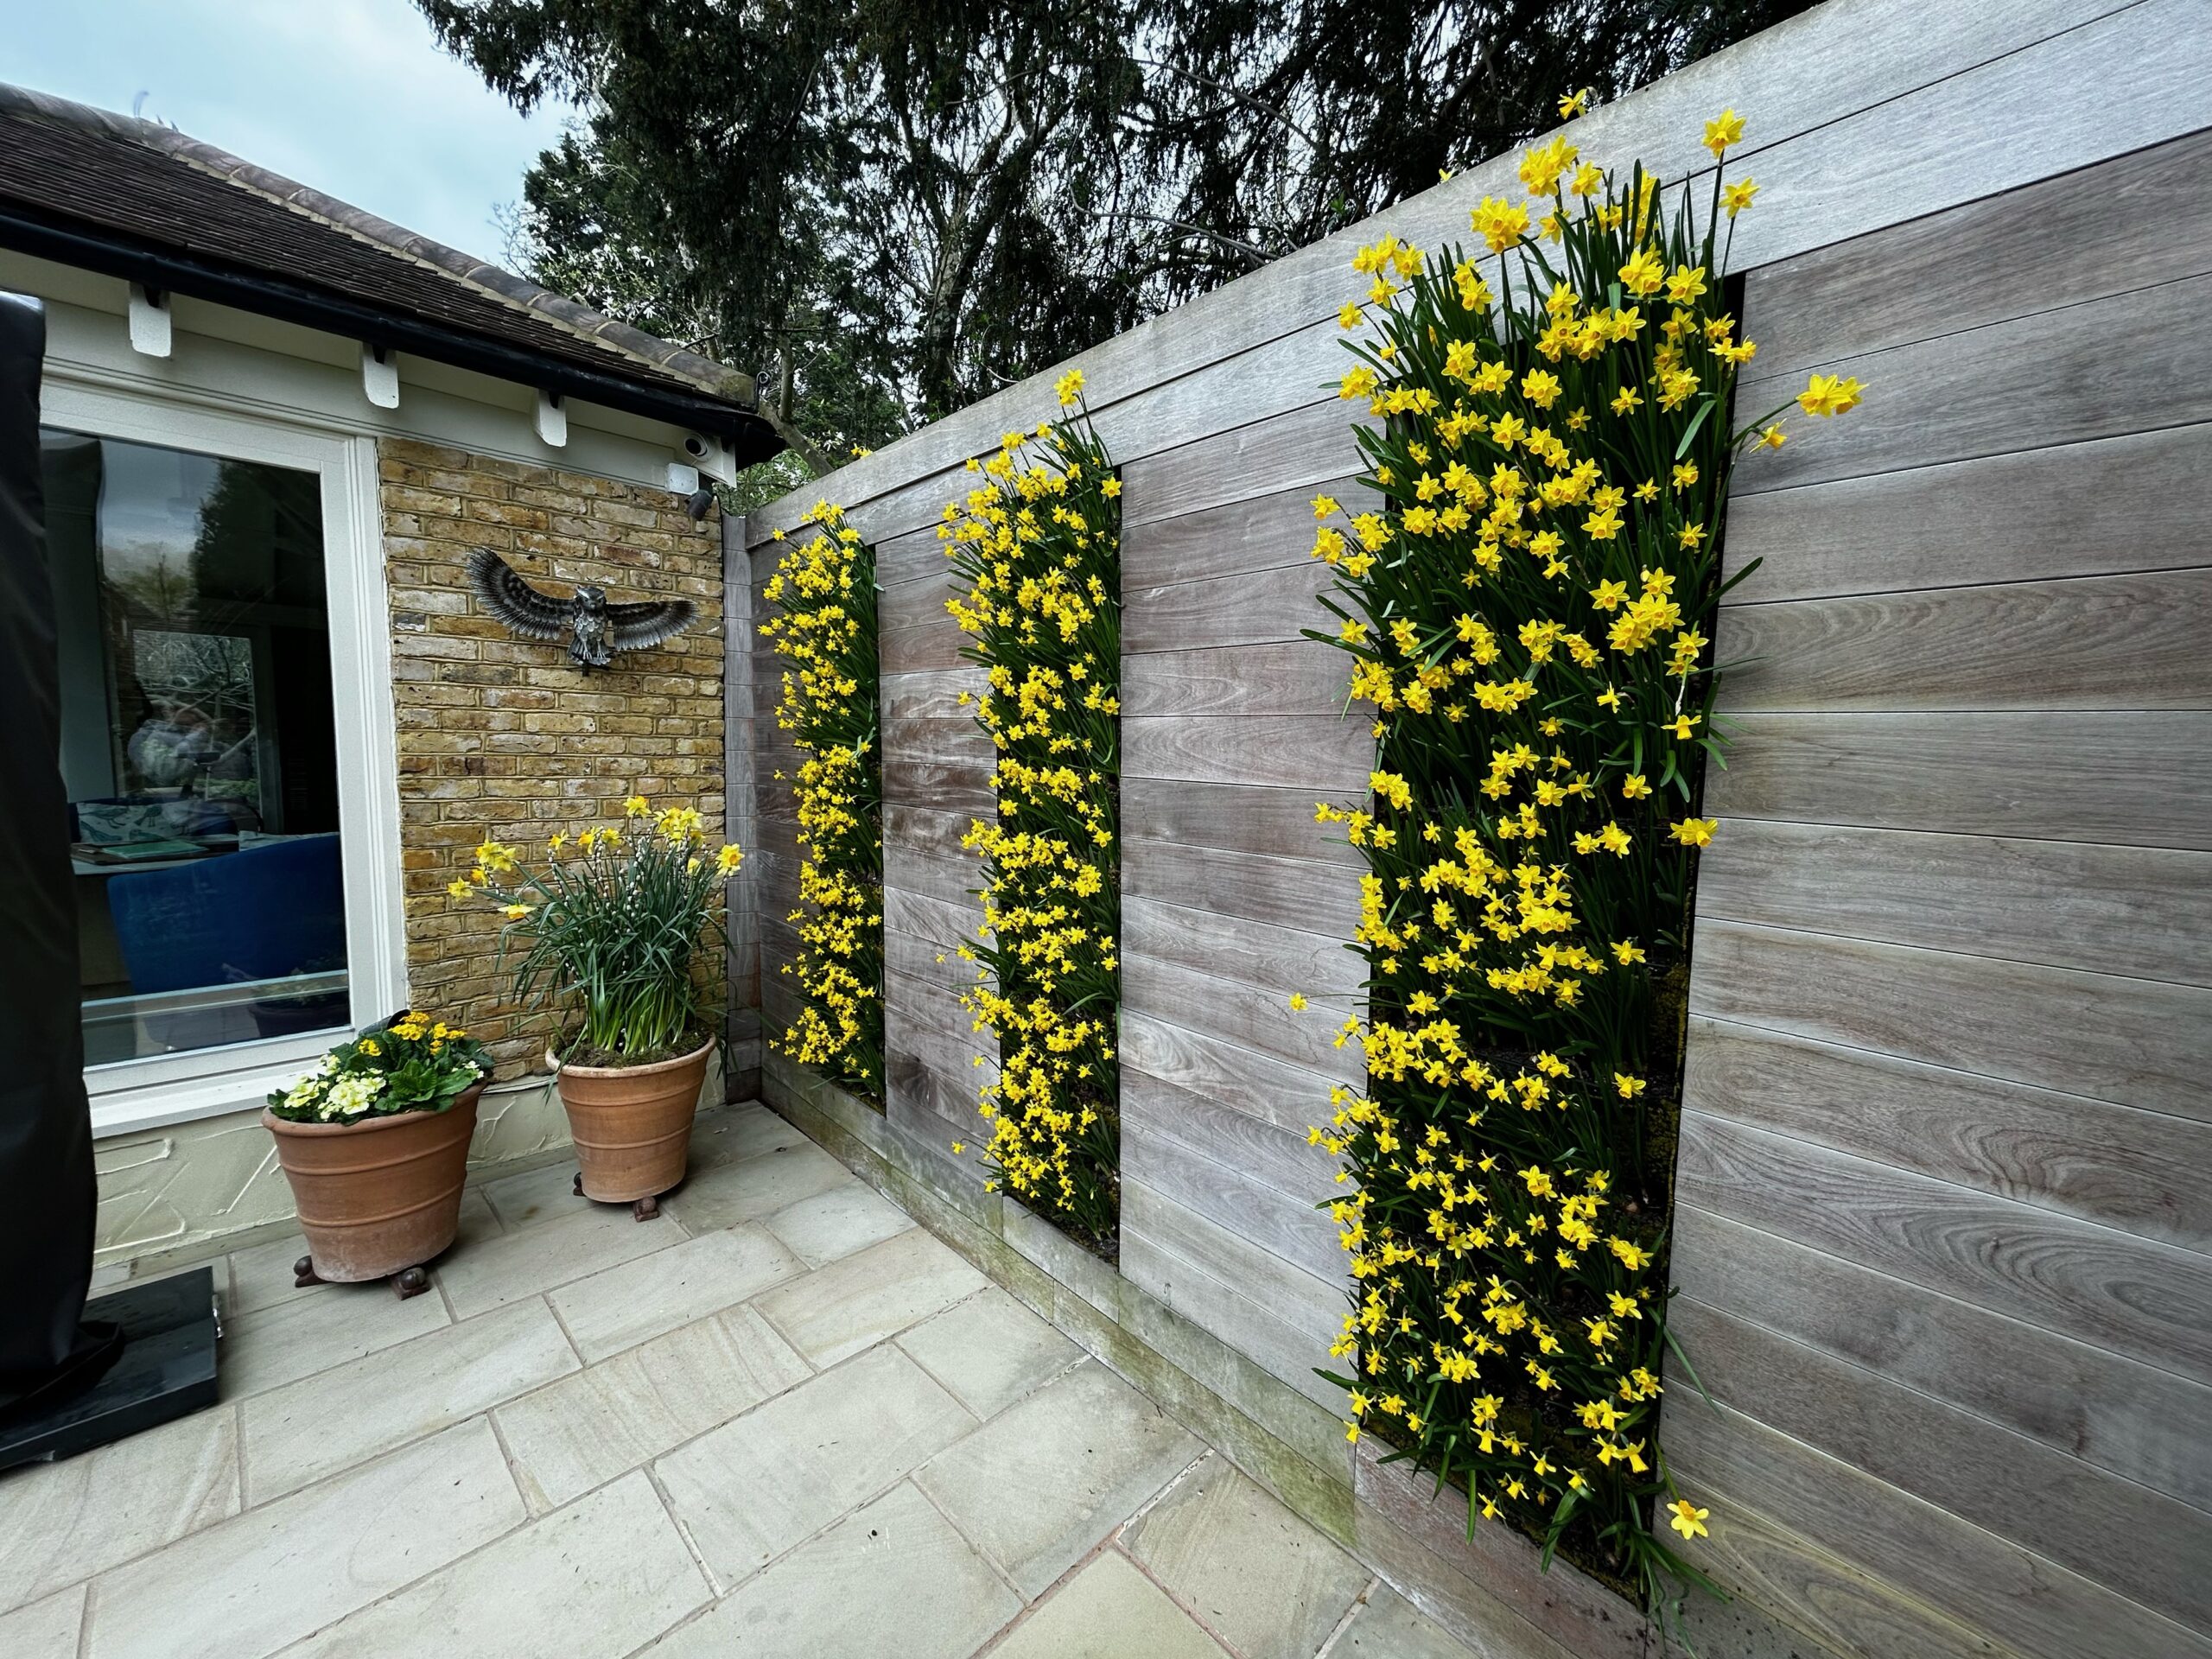 spring flower living walls - full of daffodils for bright spring colour